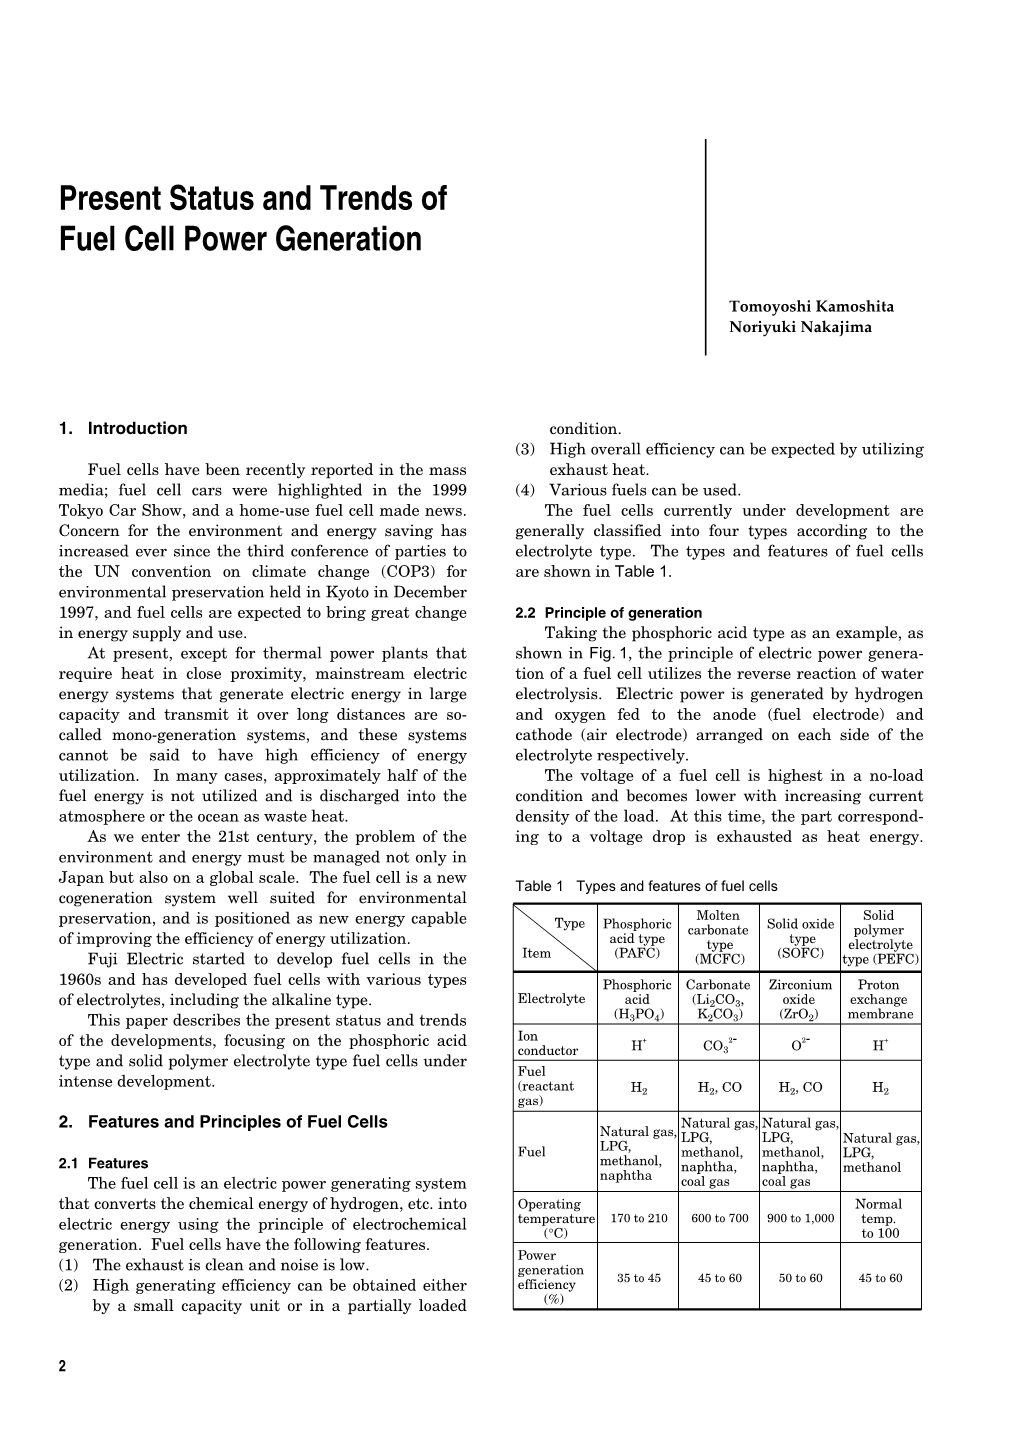 Present Status and Trends of Fuel Cell Power Generation